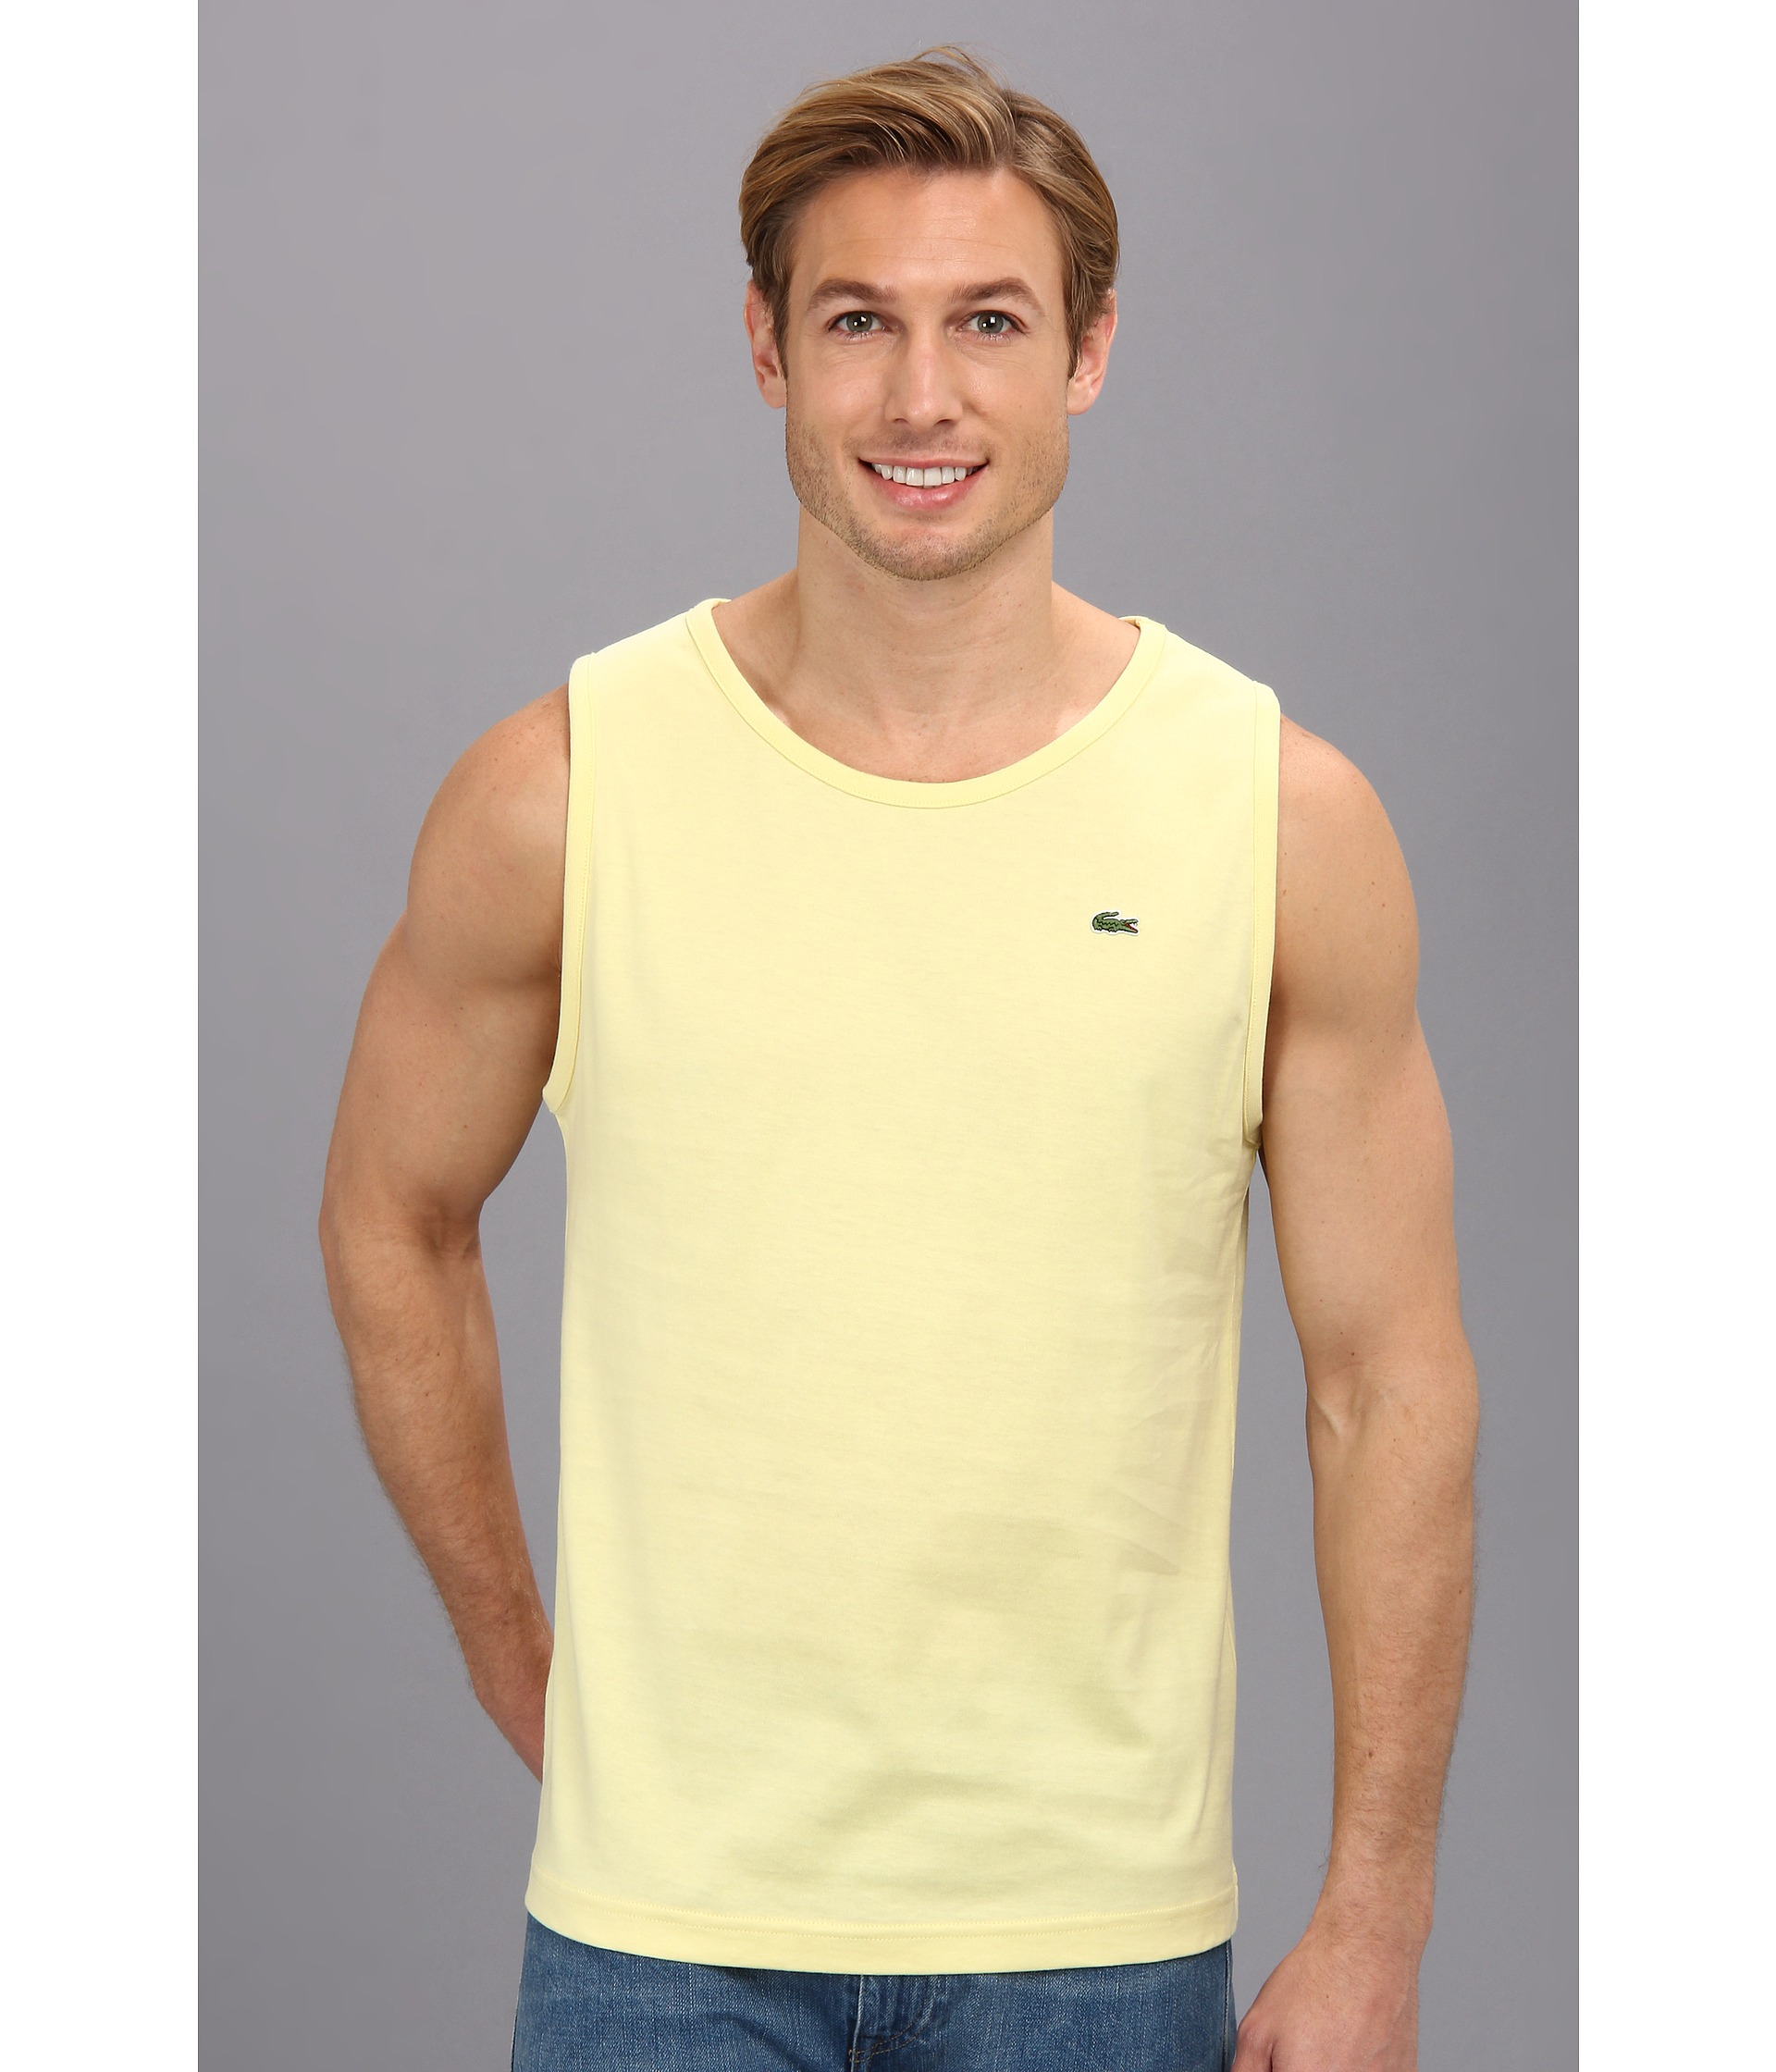 Lacoste Cotton Jersey Tank Top in Yellow for Men - Lyst